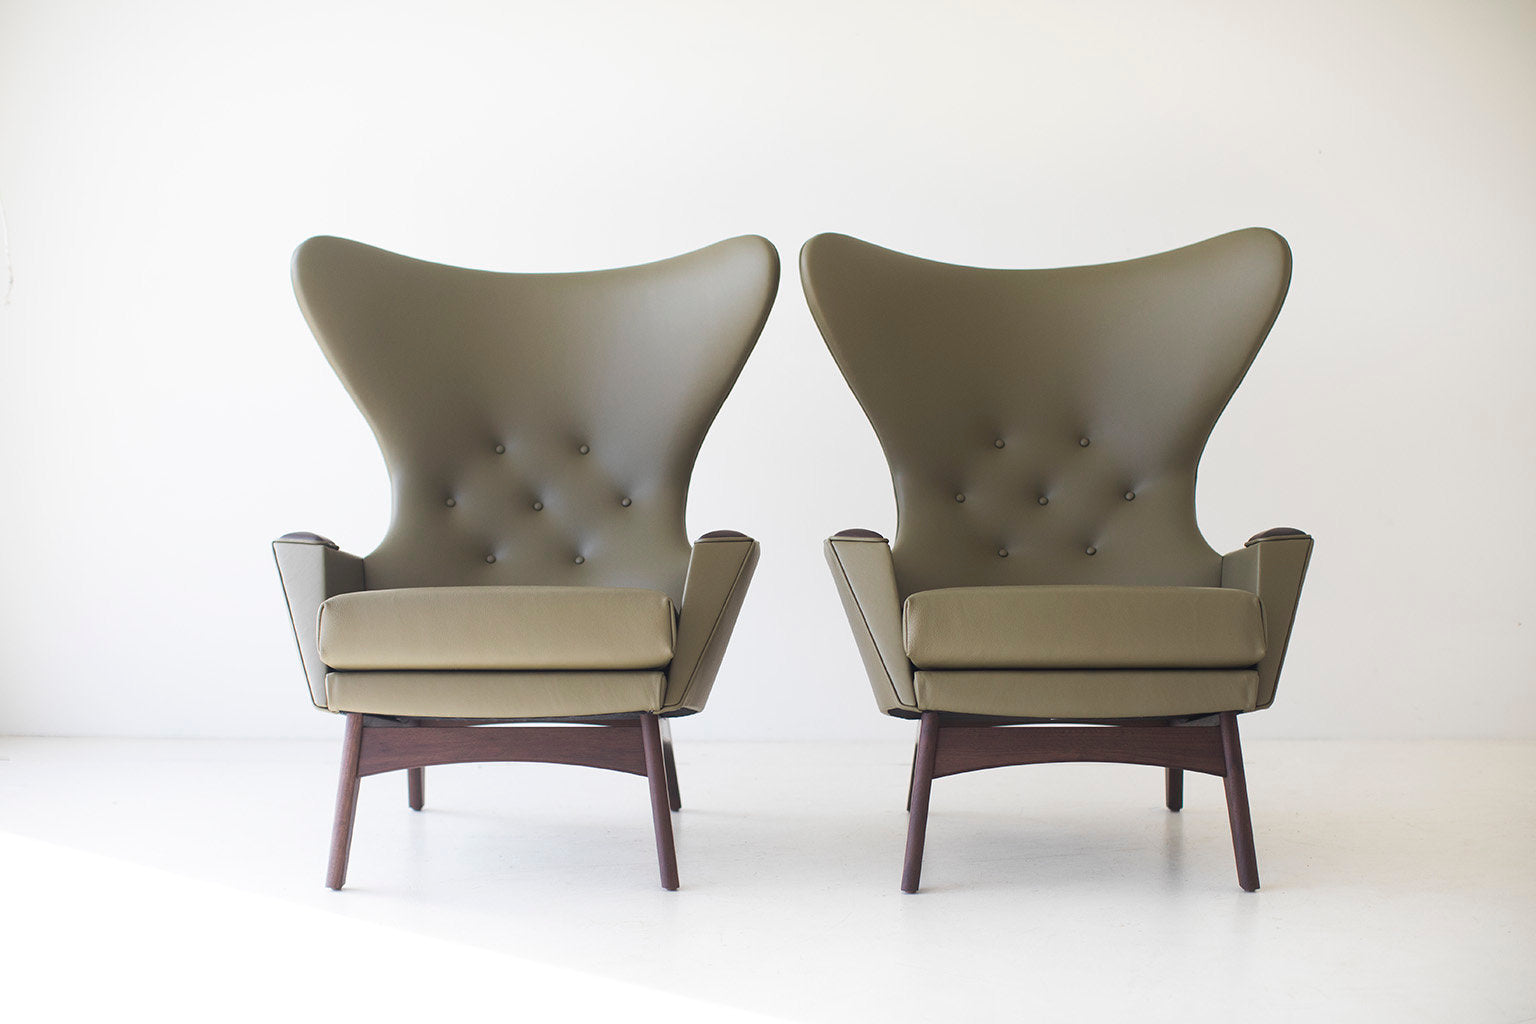 green-leather-wing-chair-1407-03